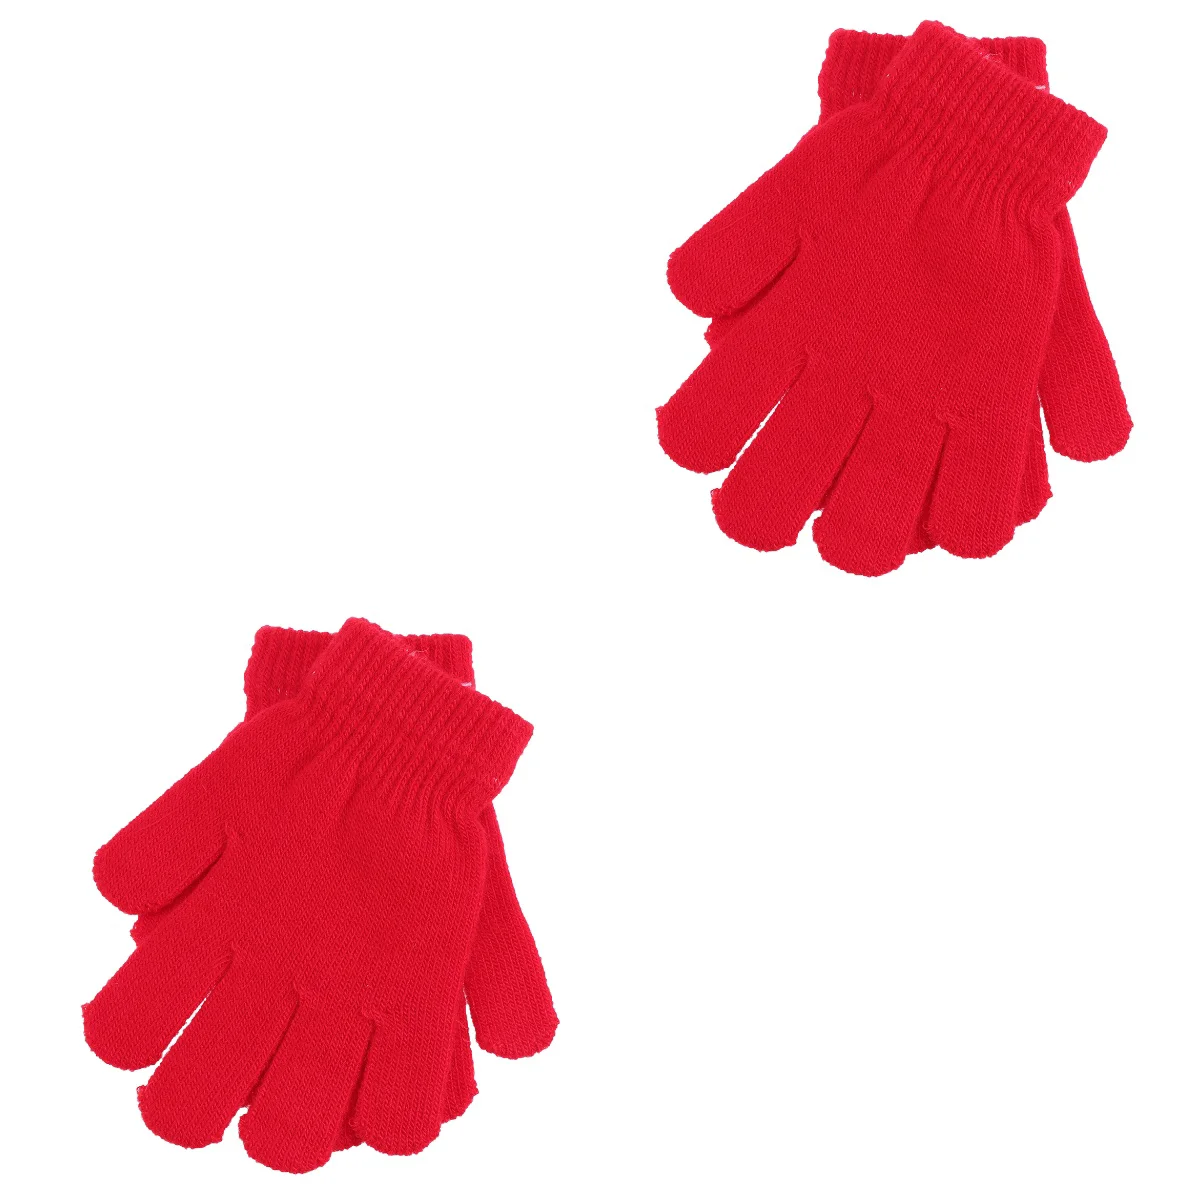 2pcs Children's Gloves Autumn and Winter Models Knitted Solid Color Five Fingers Warm Gloves 4-12 Years Old (Red)